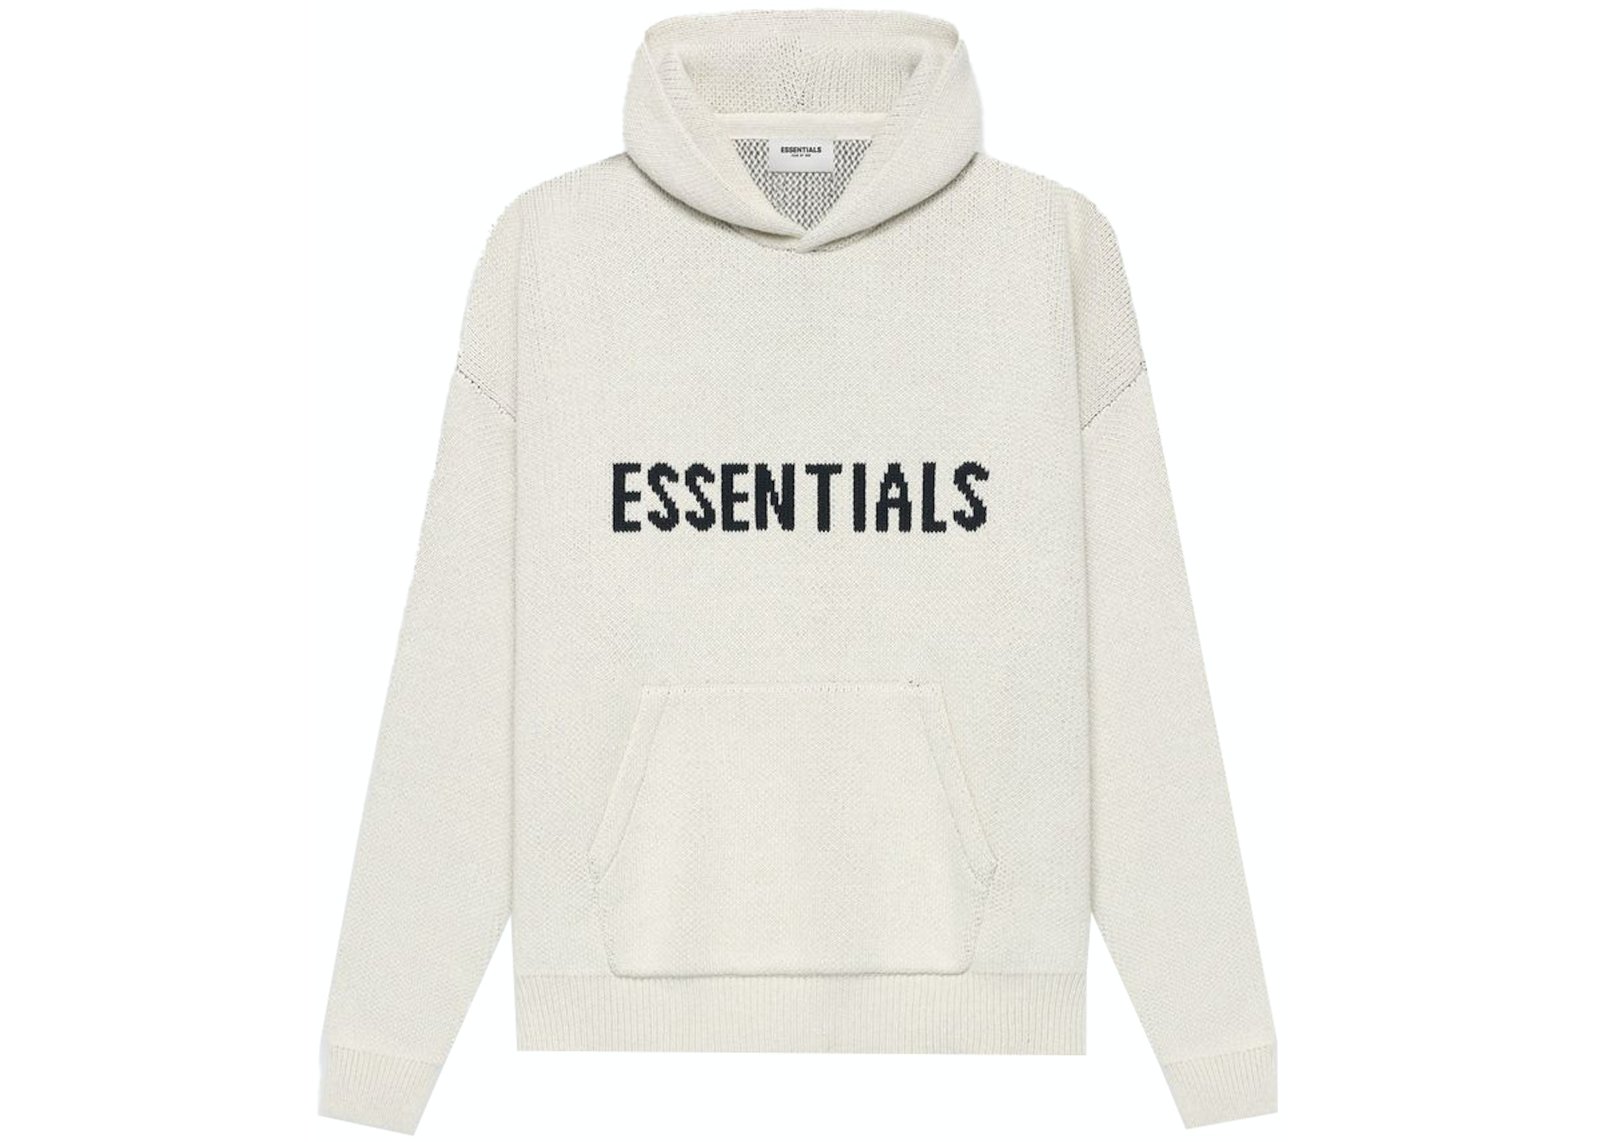 Fear of God Essentials Knit Pullover Hoodie Light Heather